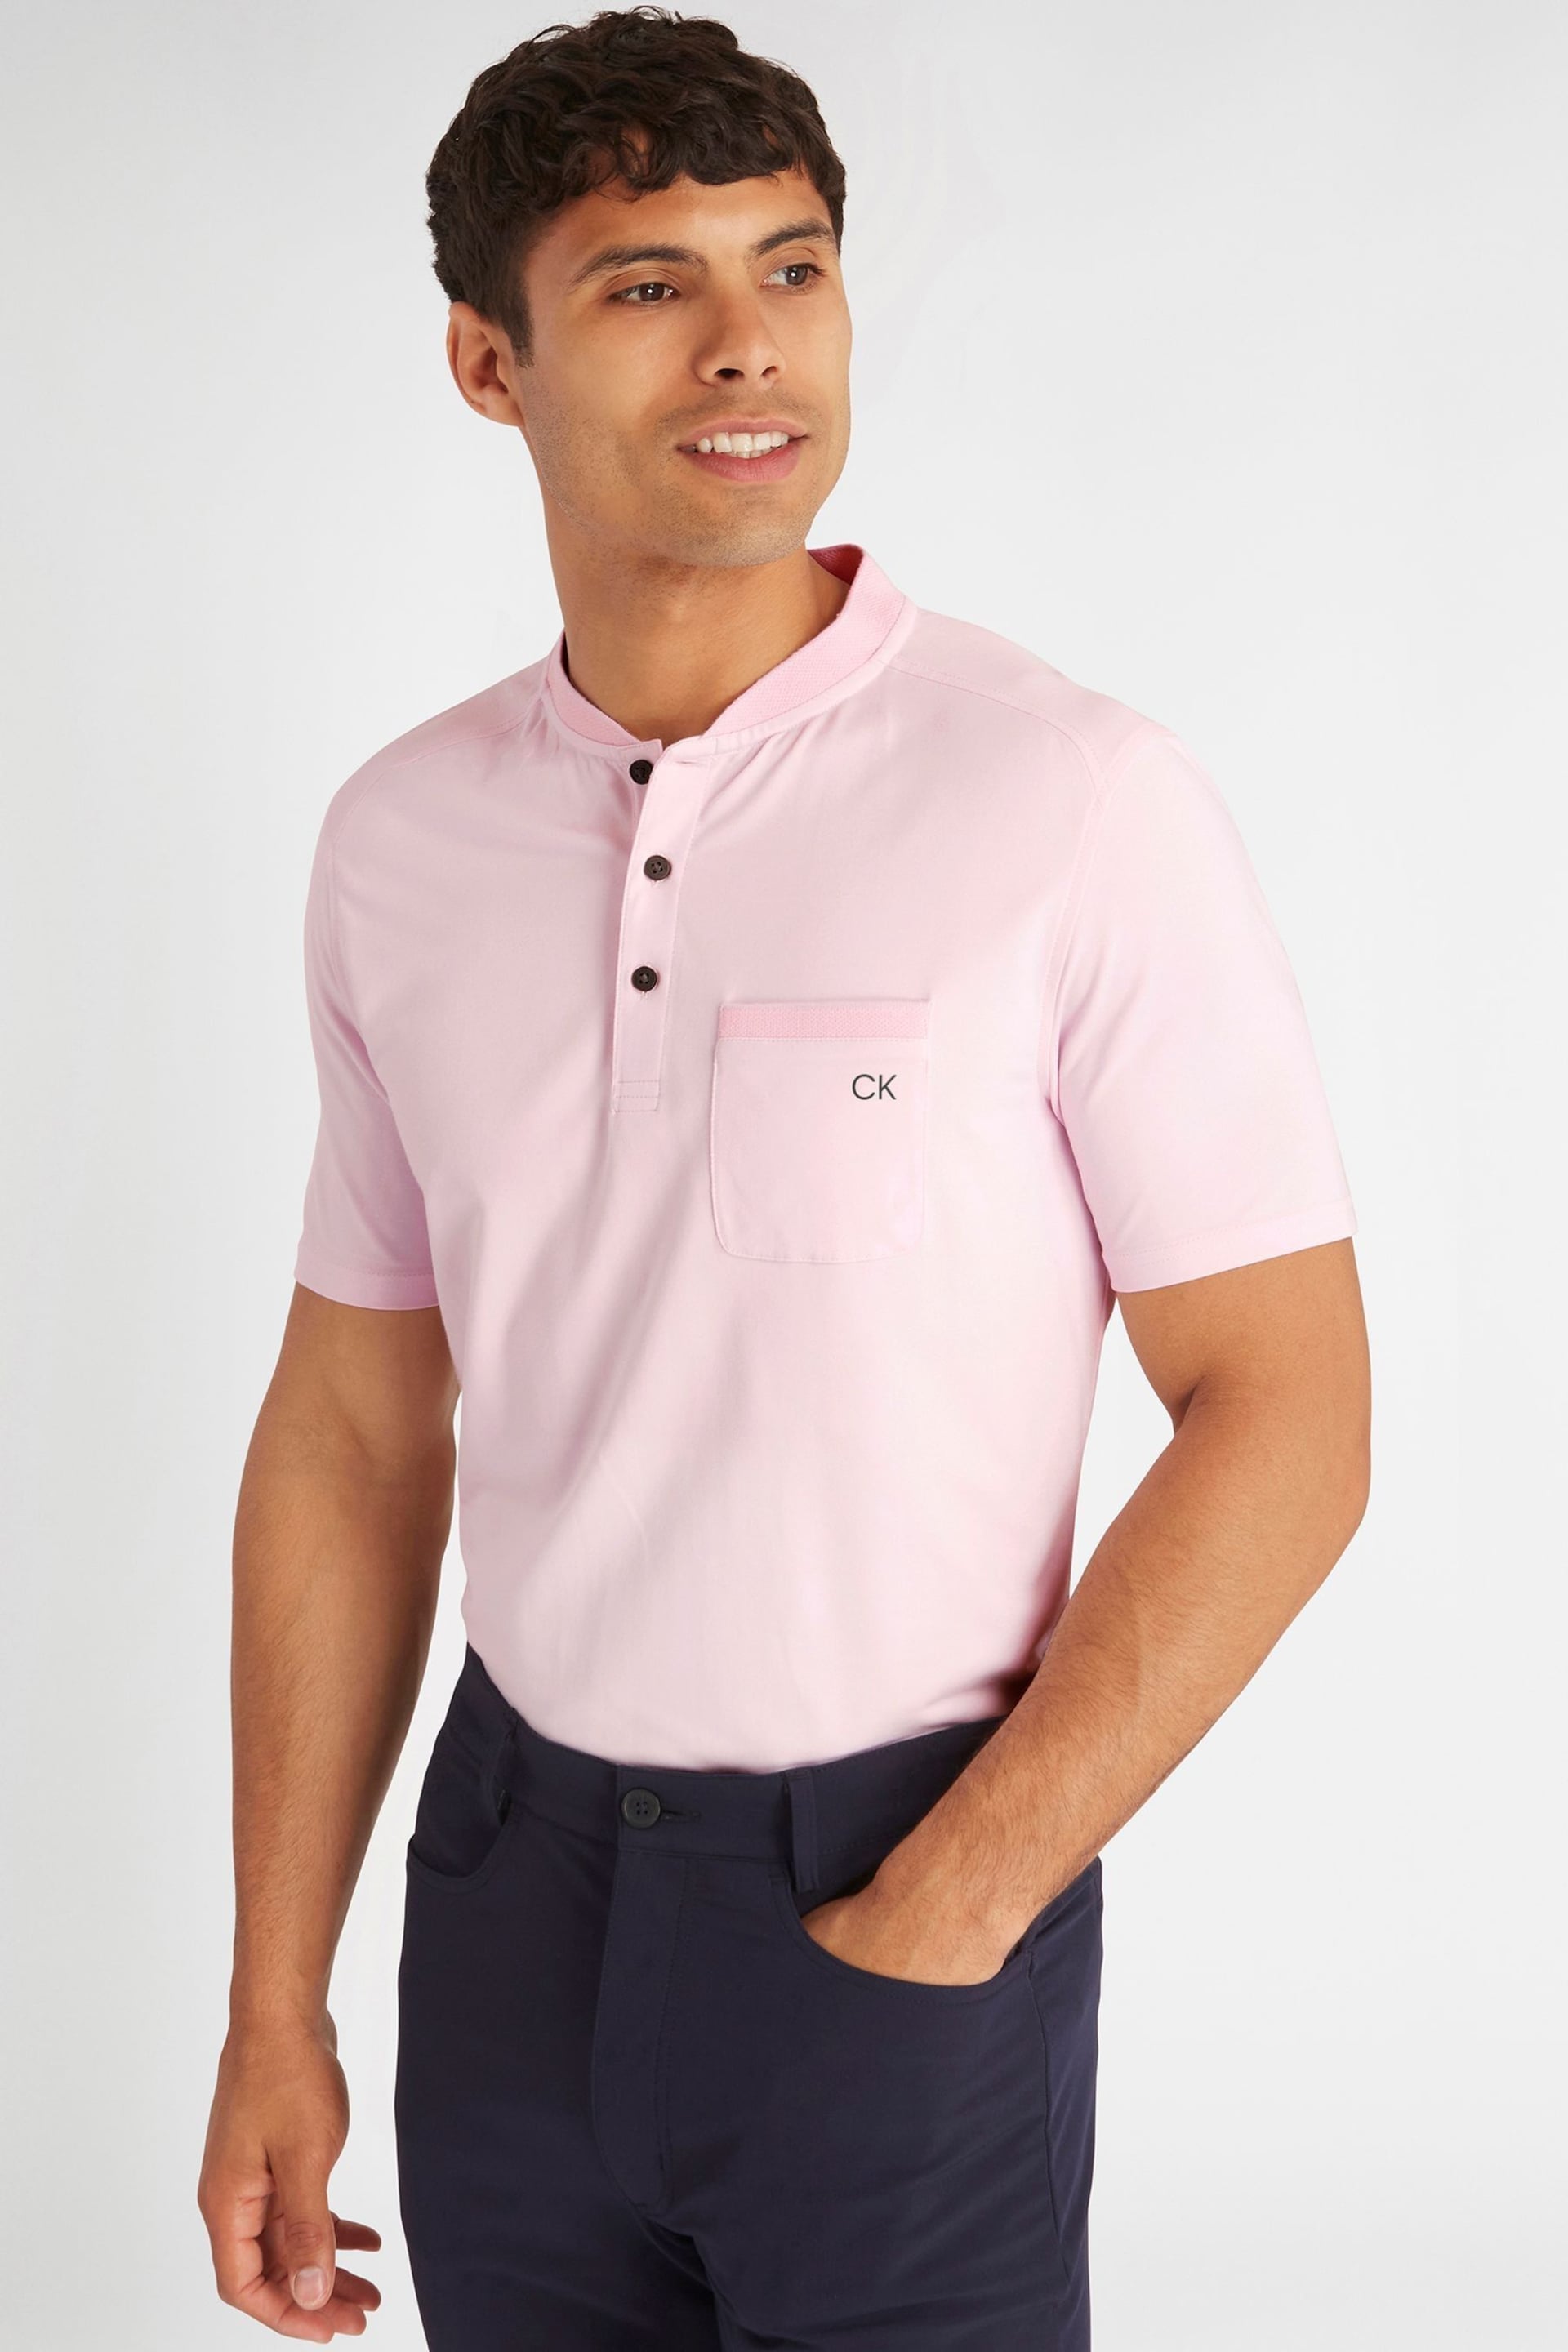 Calvin Klein Golf Pink Middlebrook Polo Shirt - Image 1 of 8